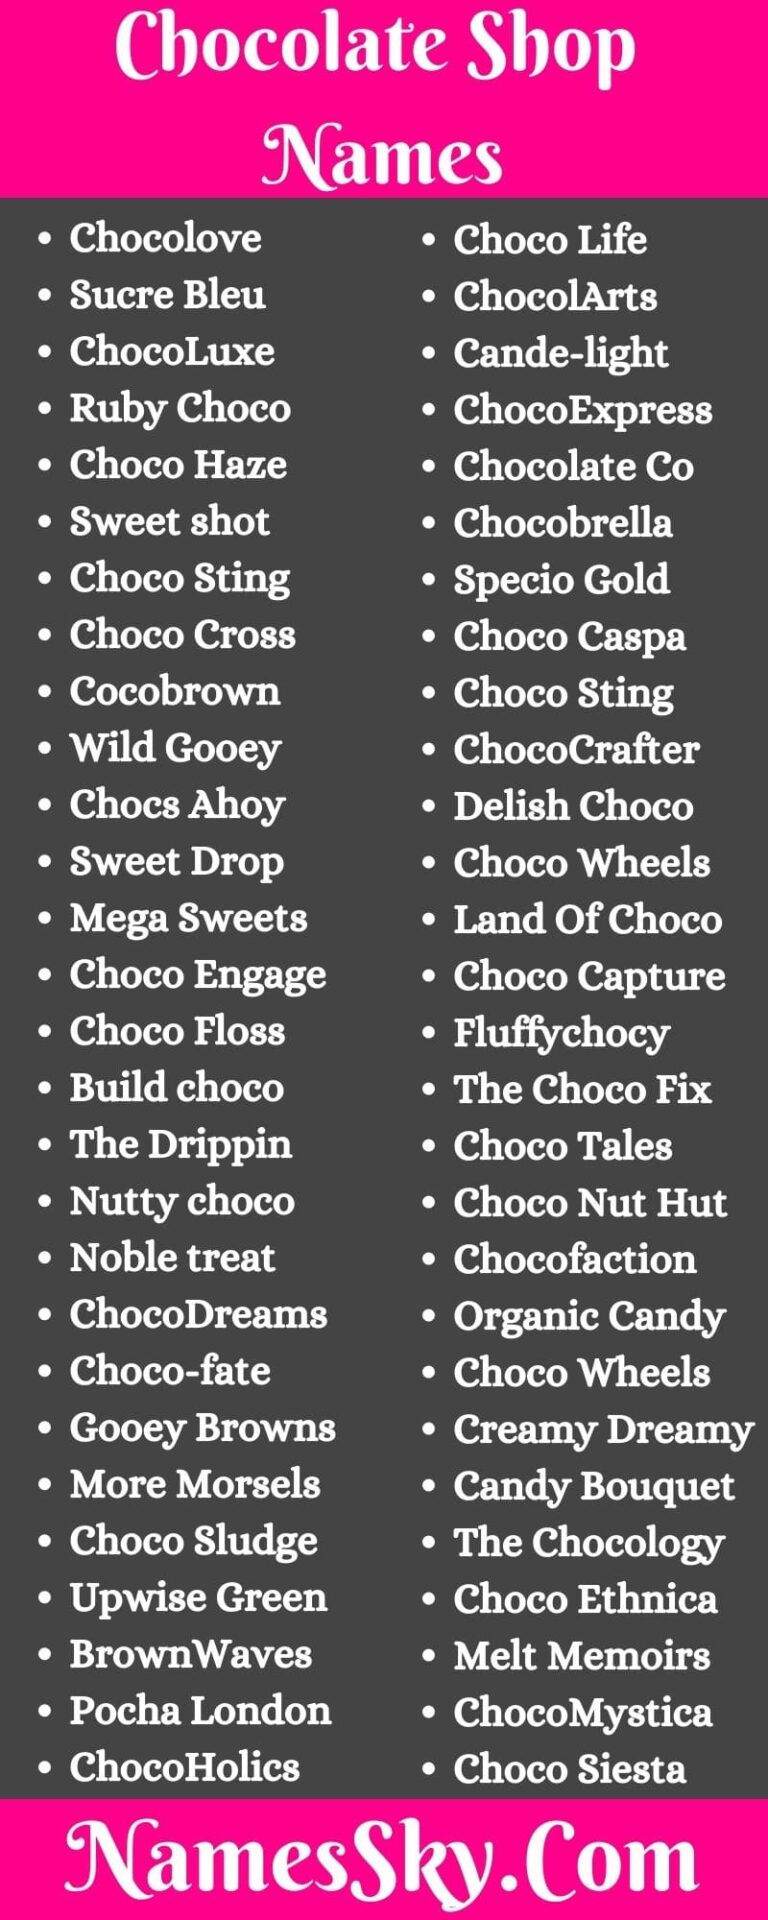 Chocolate Shop Names: 271+ Best Names For Chocolate Business & Company